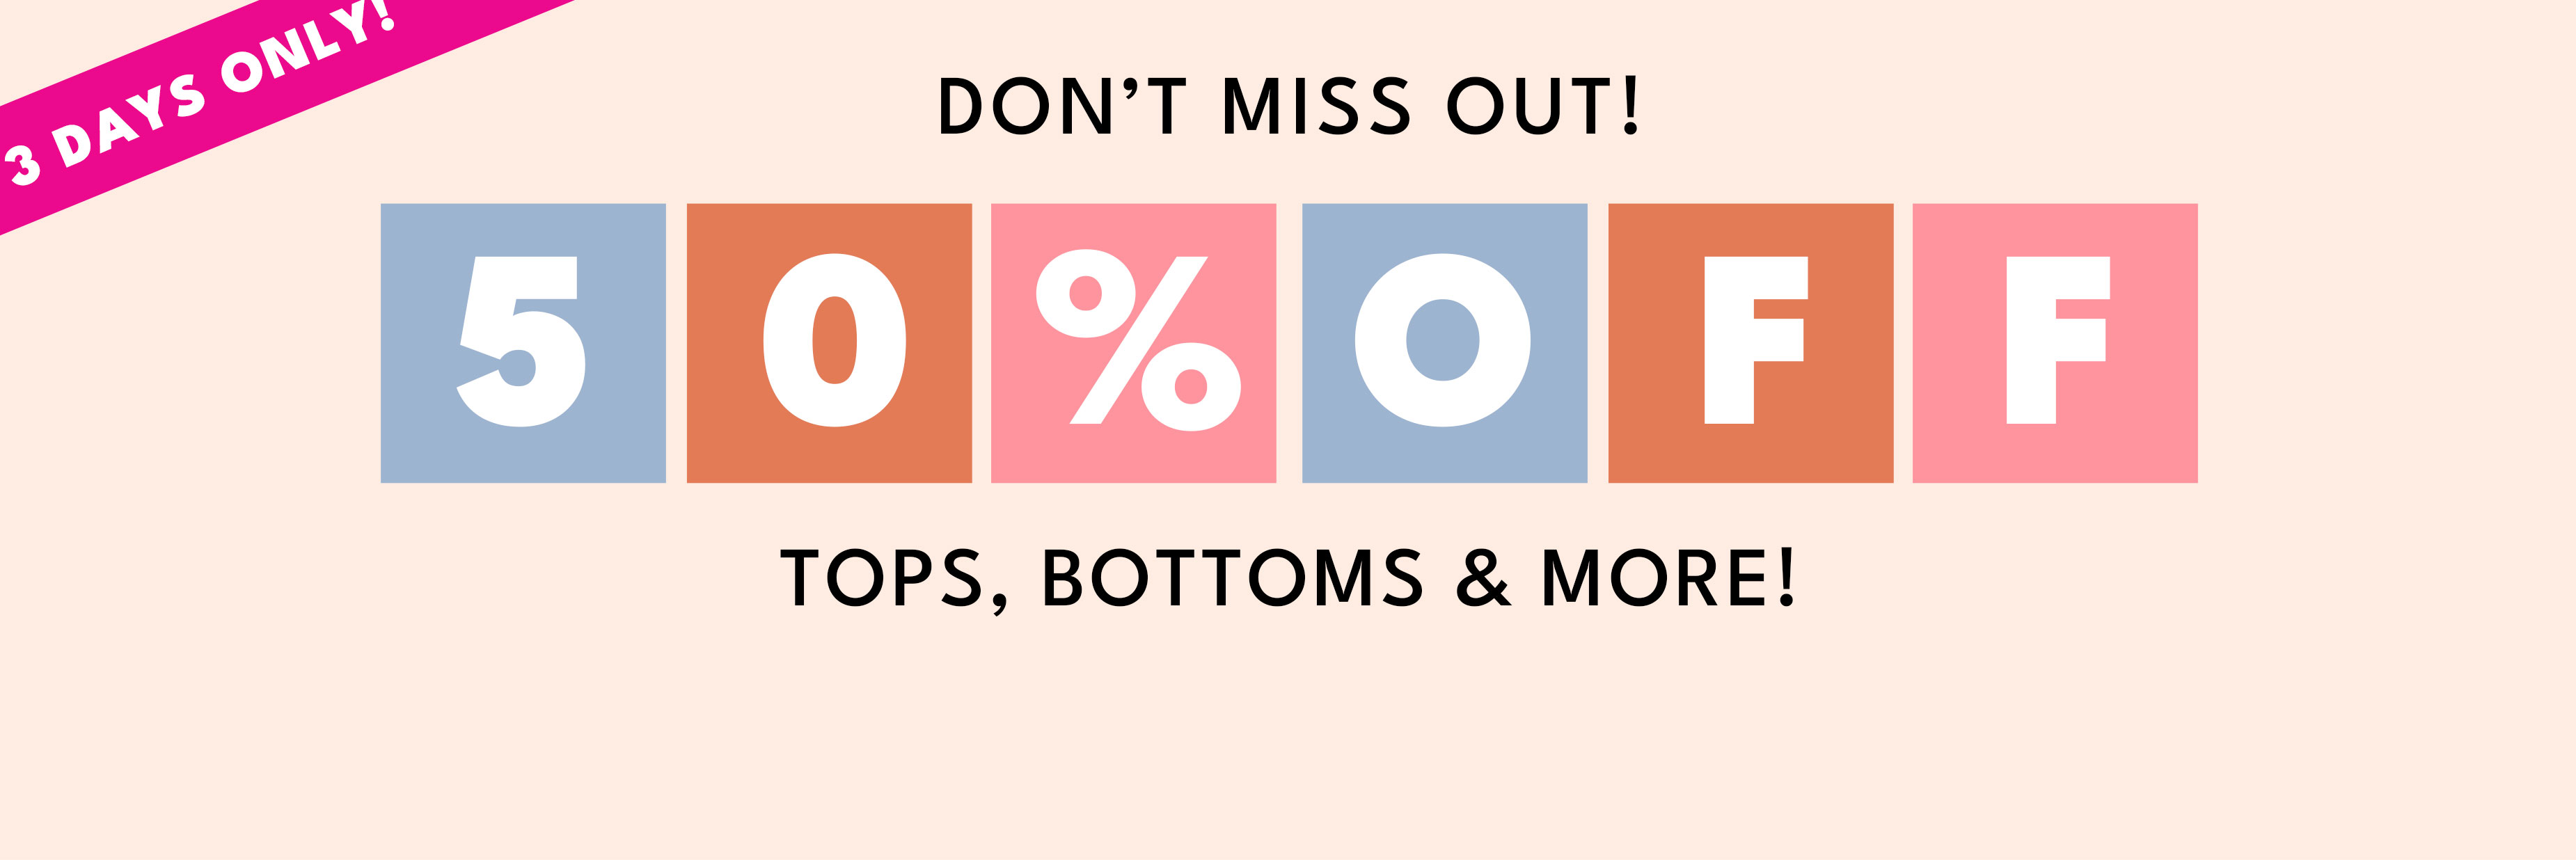 3 days only! don't miss out 50% off tops, bottoms & more! shop now